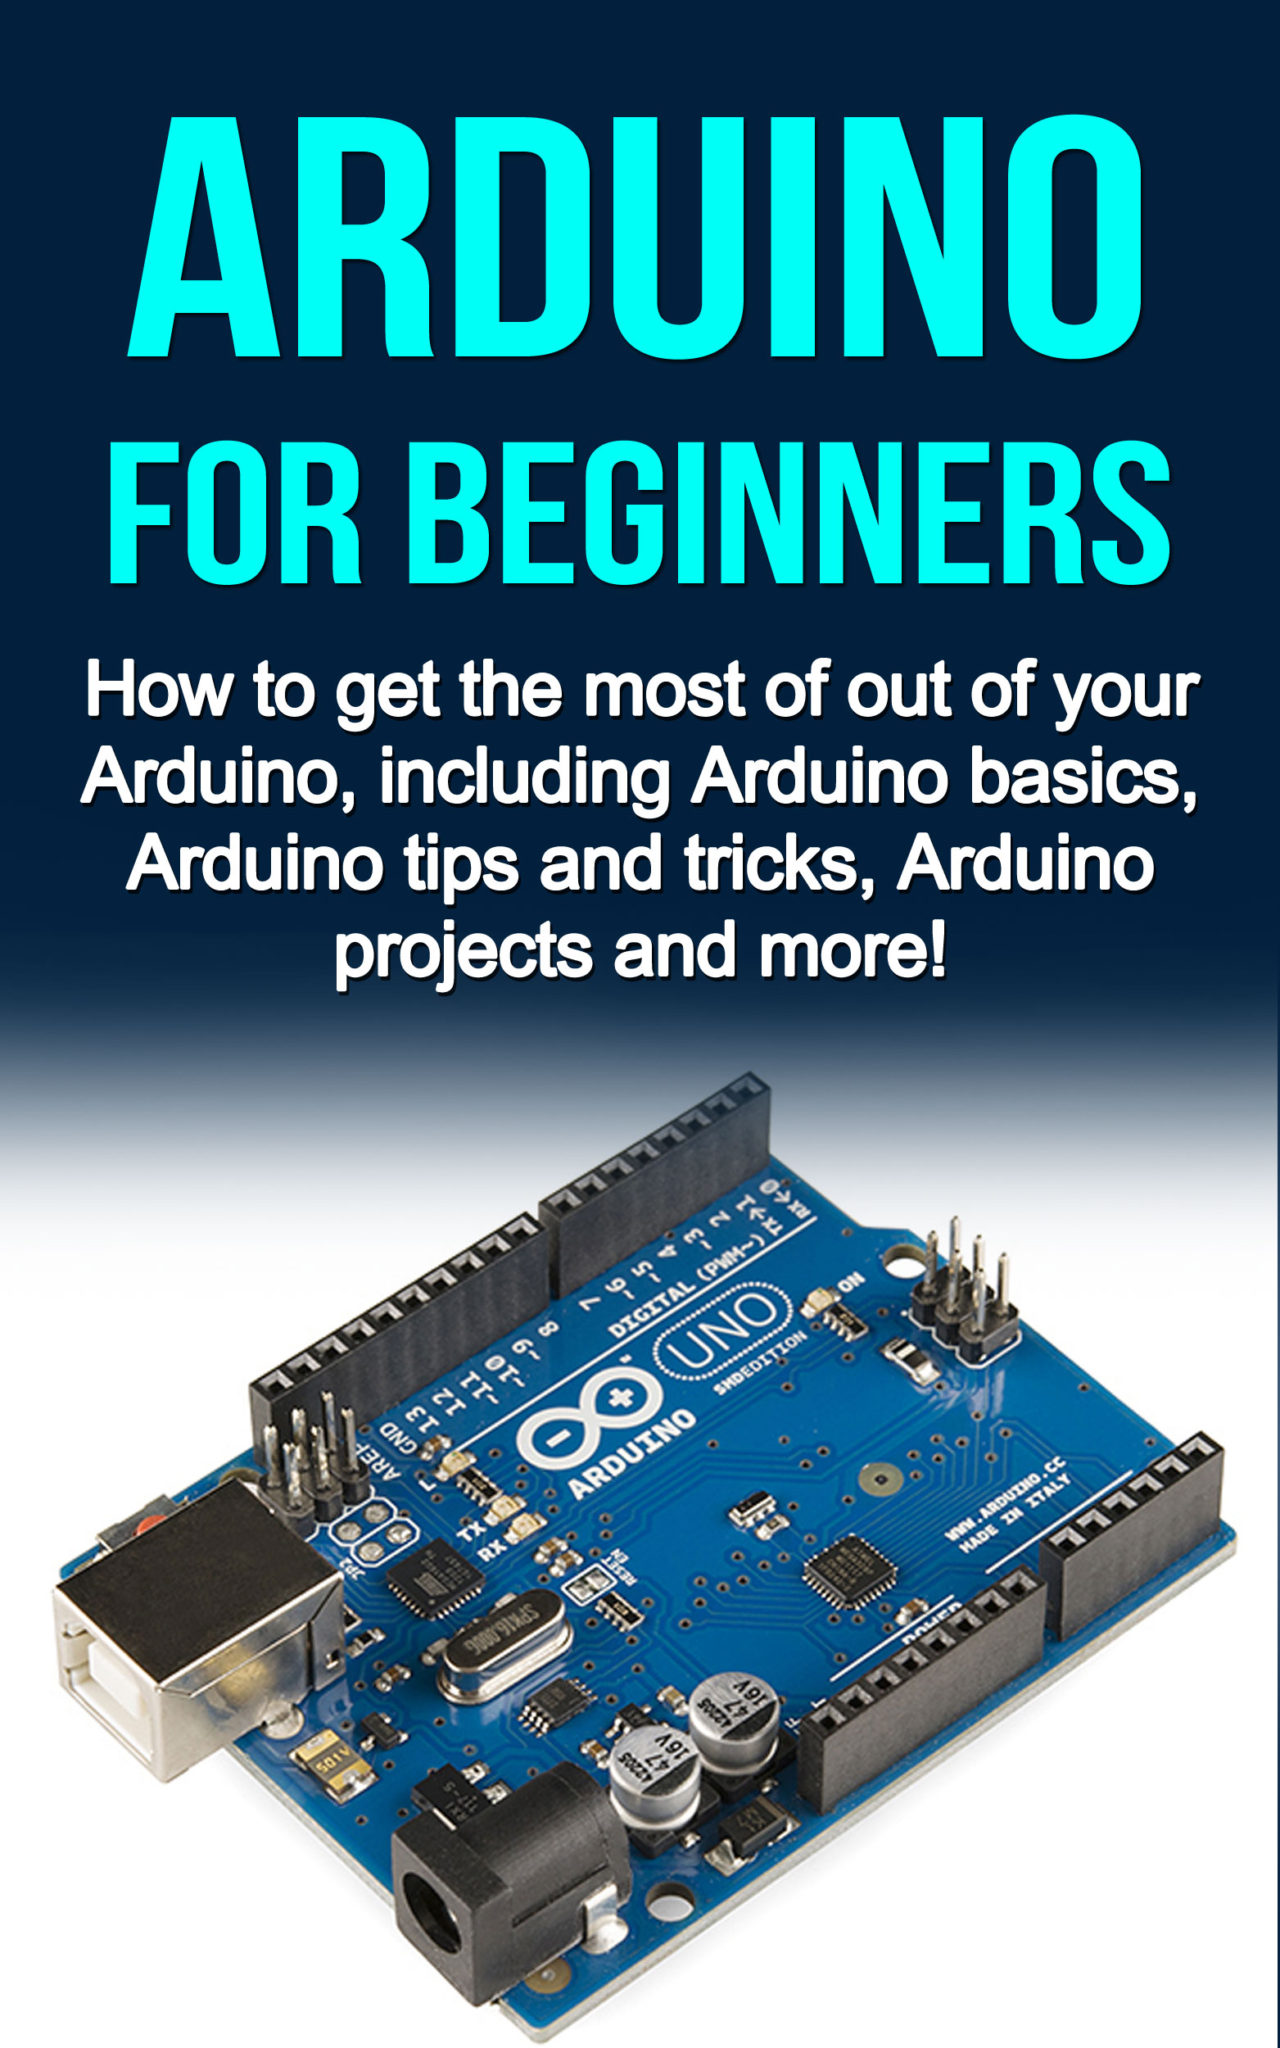 FREE: Arduino For Beginners: How to get the most of out of your Arduino, including Arduino basics, Arduino tips and tricks, Arduino projects and more! by Matthew Oates